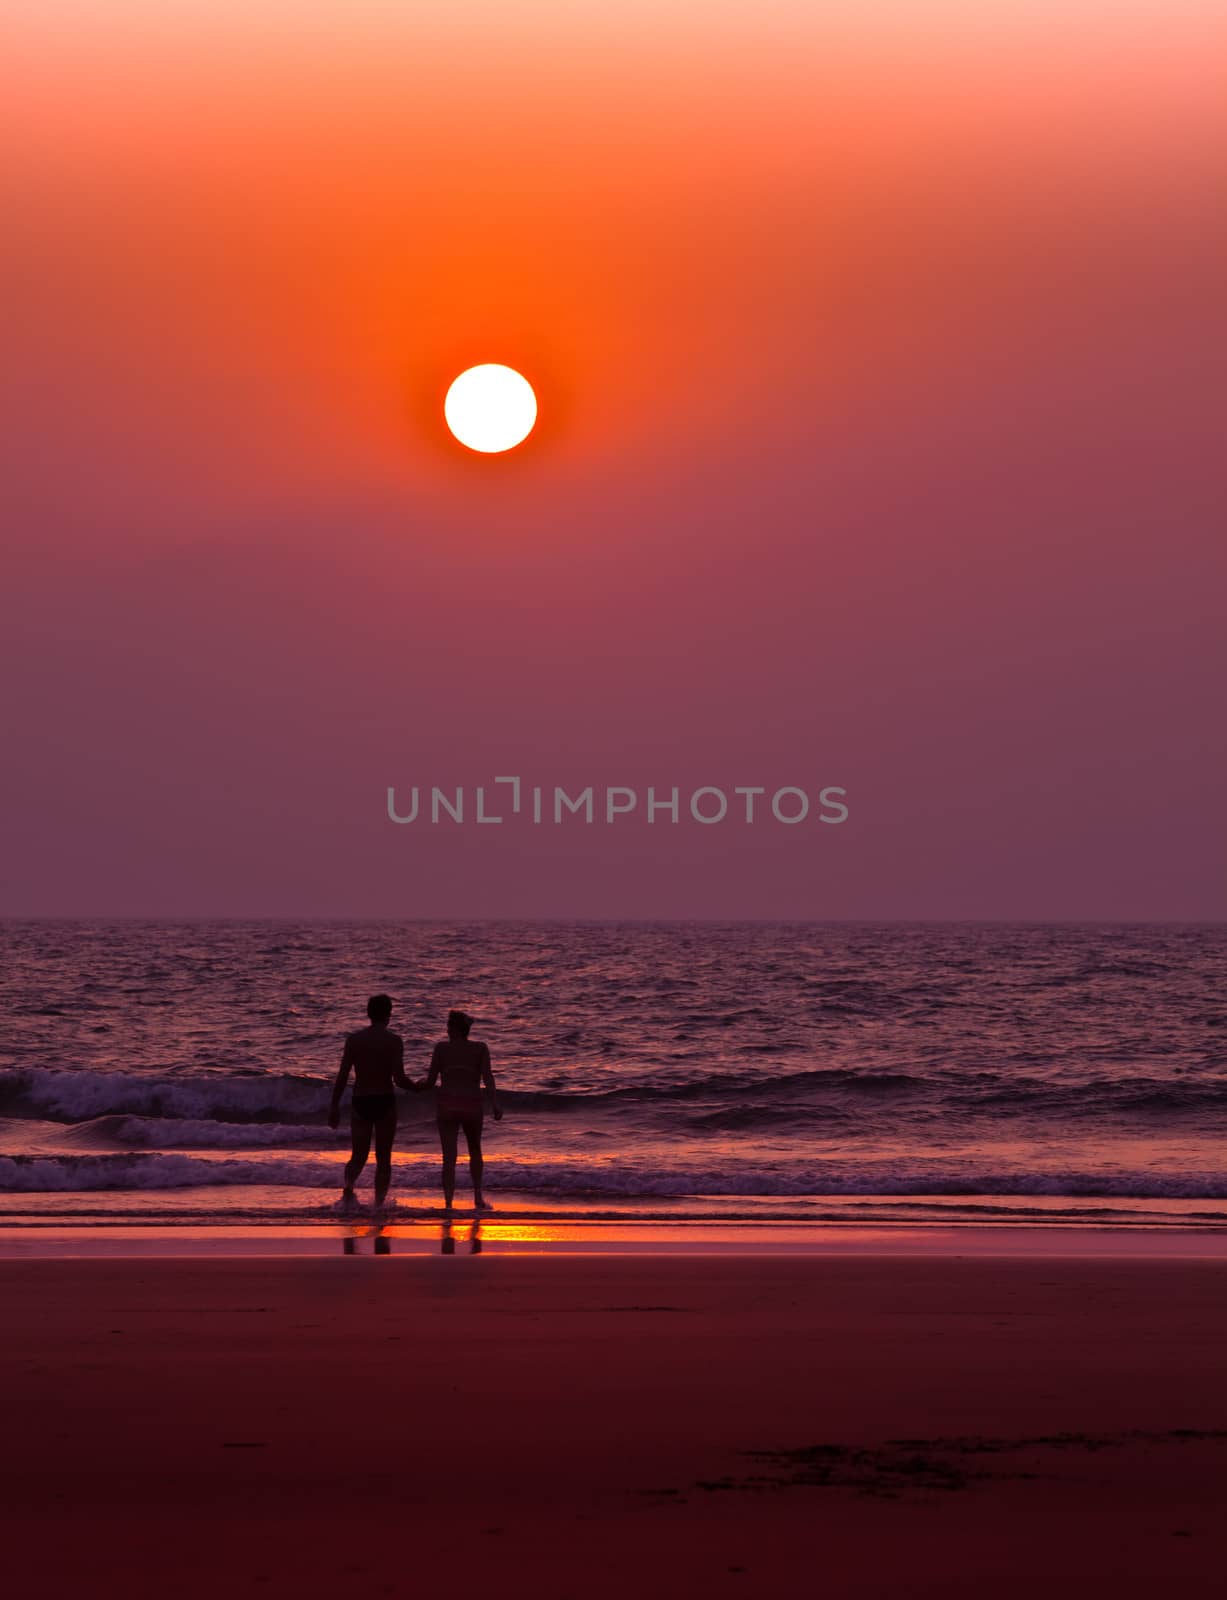 Couple on the beach in the sunset lignt by vicdemid